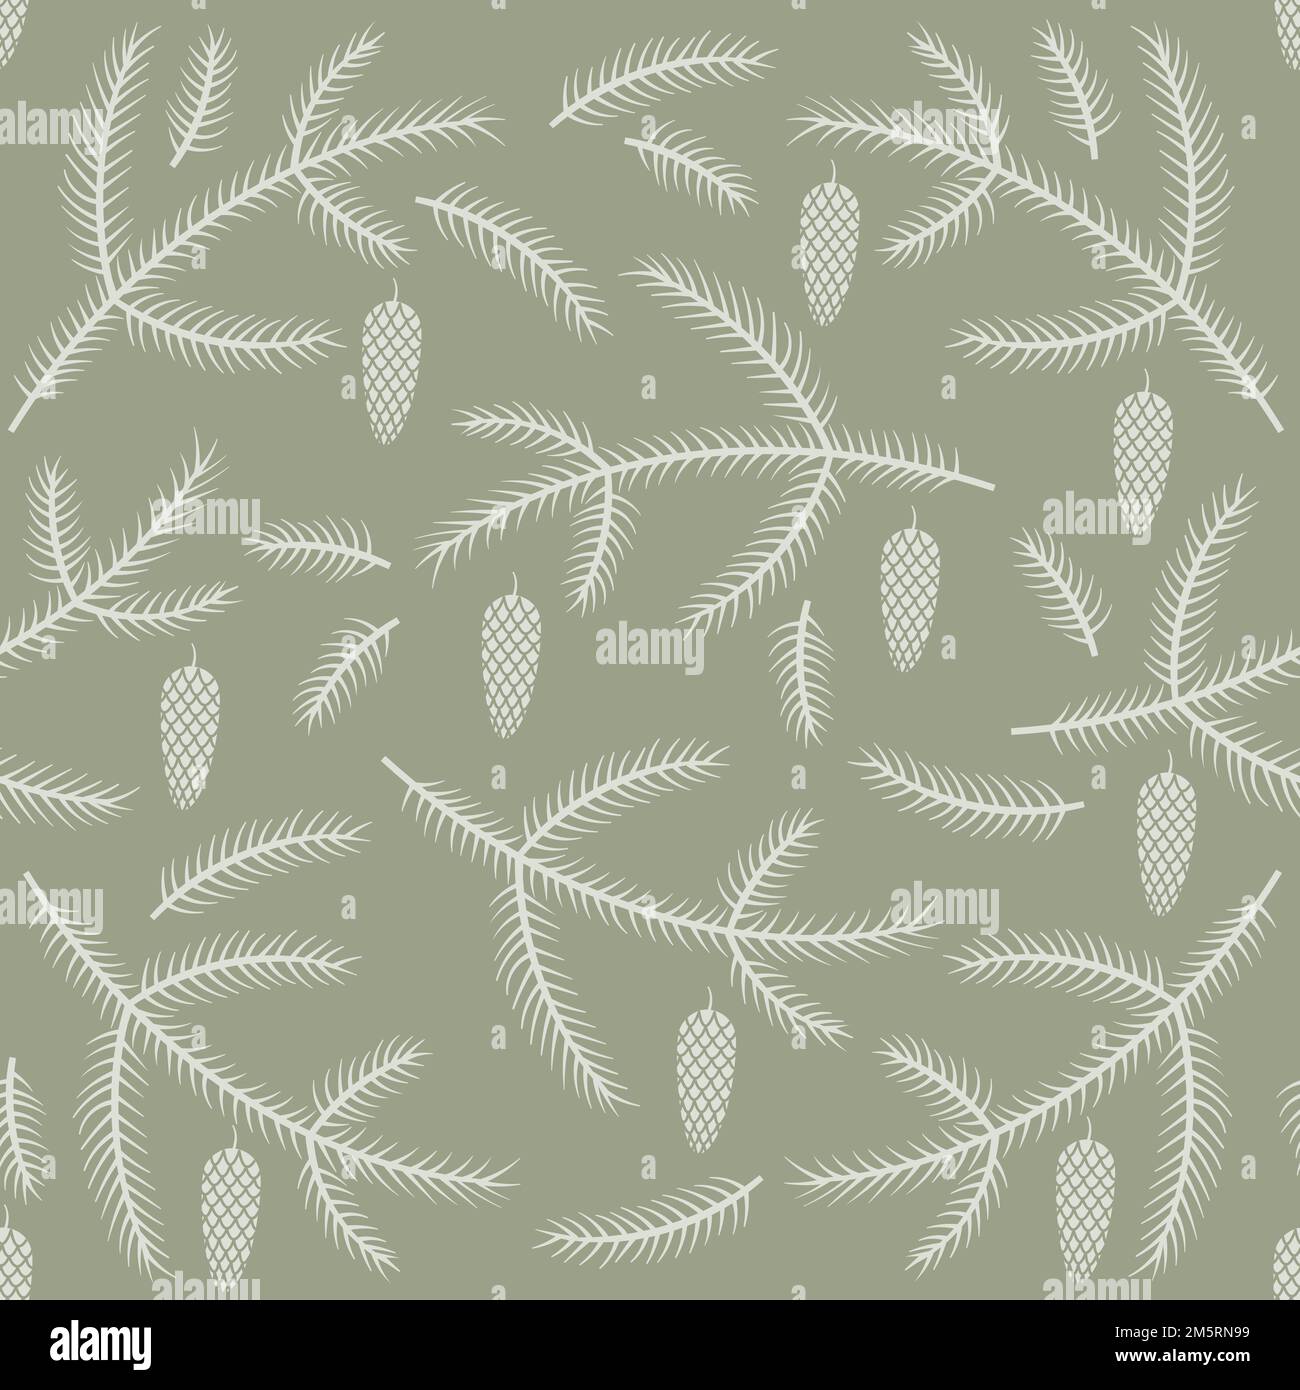 Seamless pattern with conifer branches and cones. Stock Vector